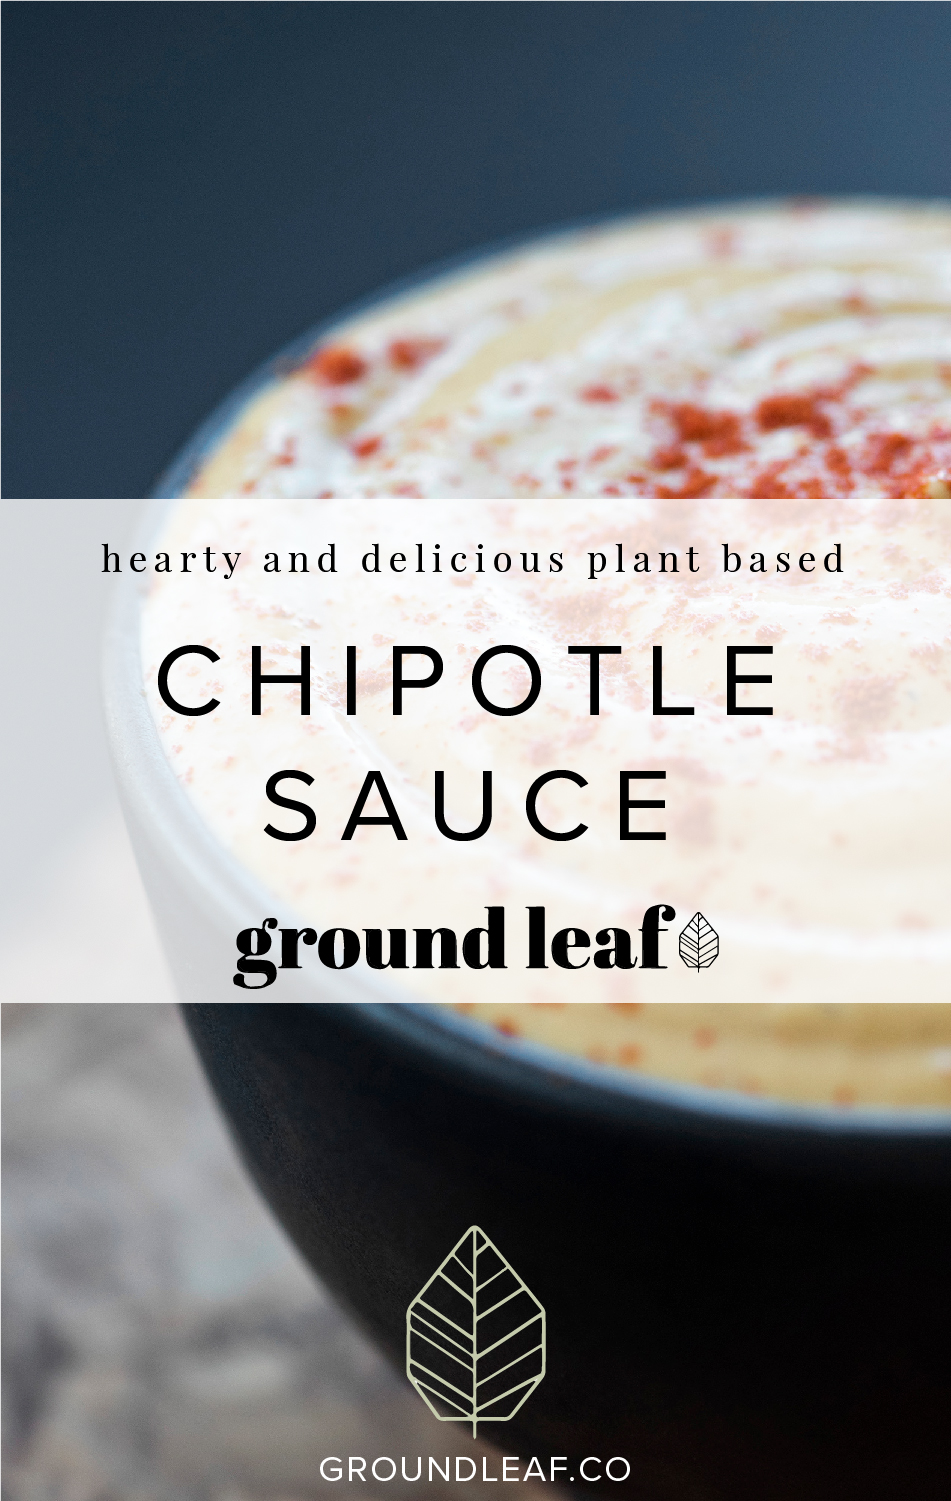 Learn how to make chipotle sauce! Video recipe included.